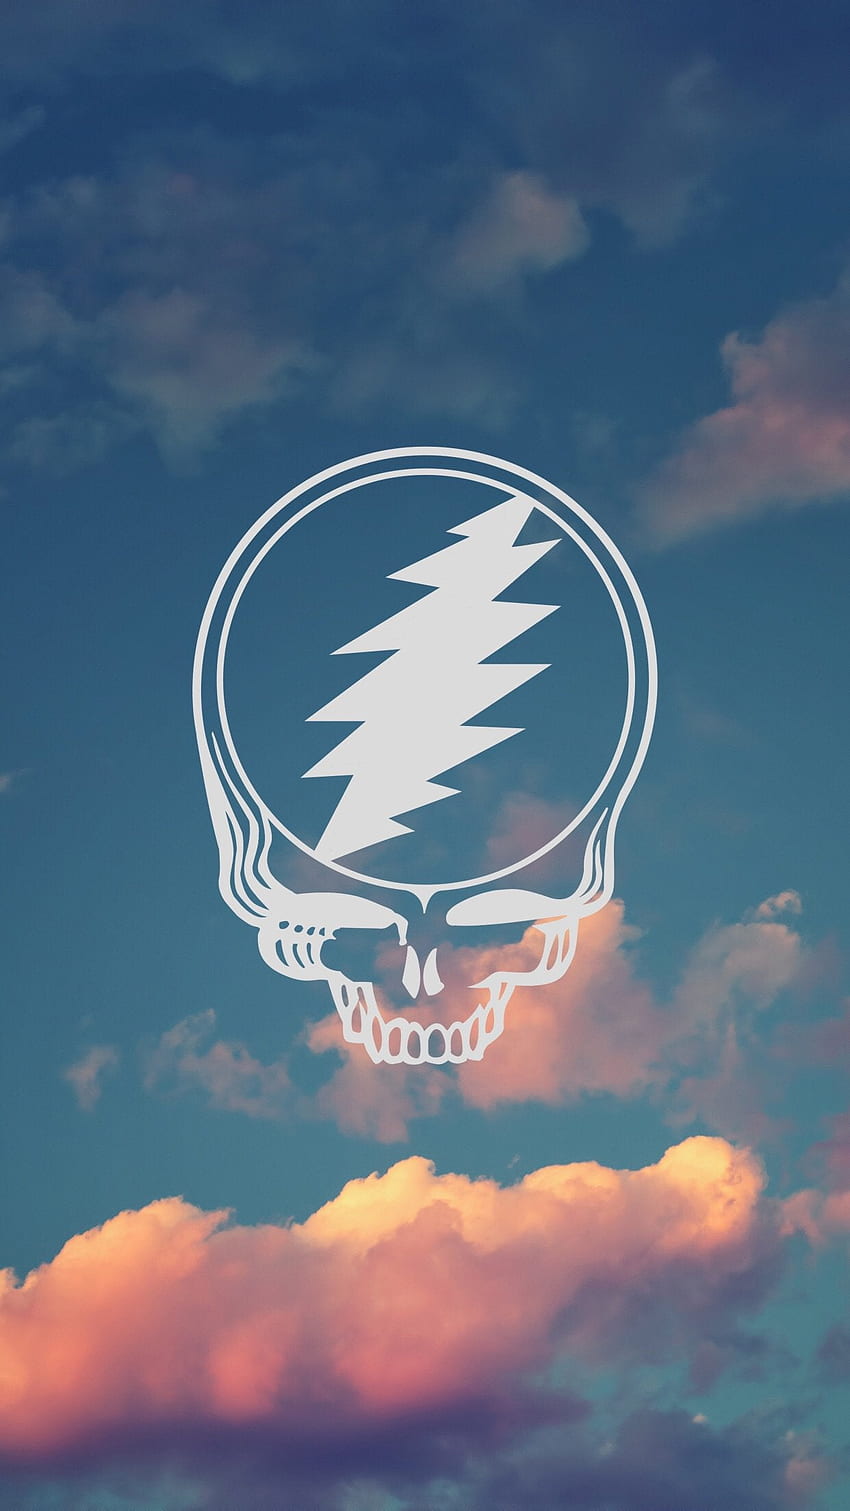 Made this for iPhones! If any of you wanna use it; go right ahead!: gratefuldead HD phone wallpaper